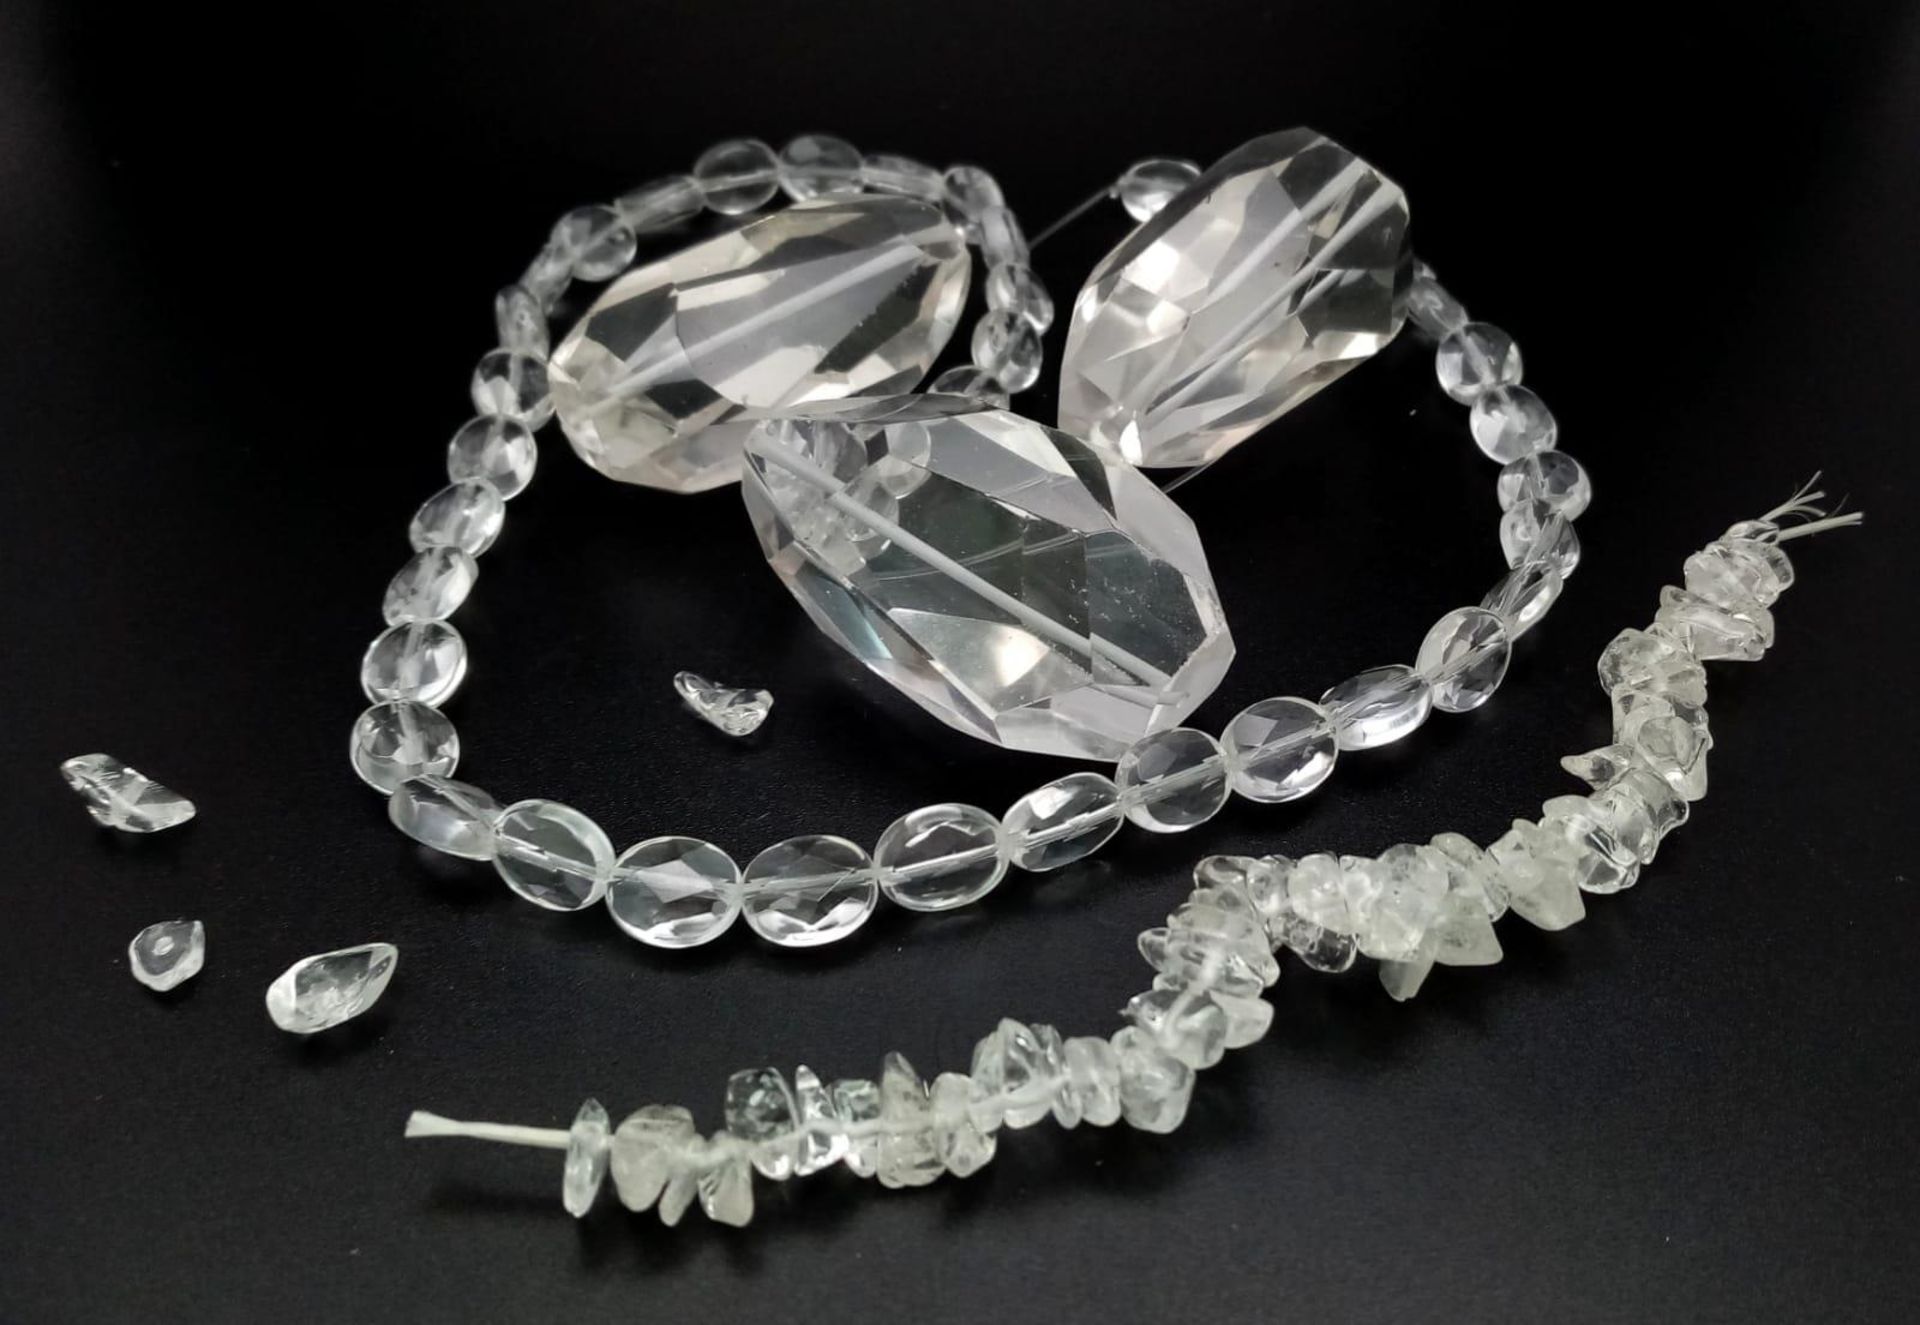 Three large (43 x 22 x 20 mm) faceted glass beads, a strand of faceted oval glass beads, 41 cm and a